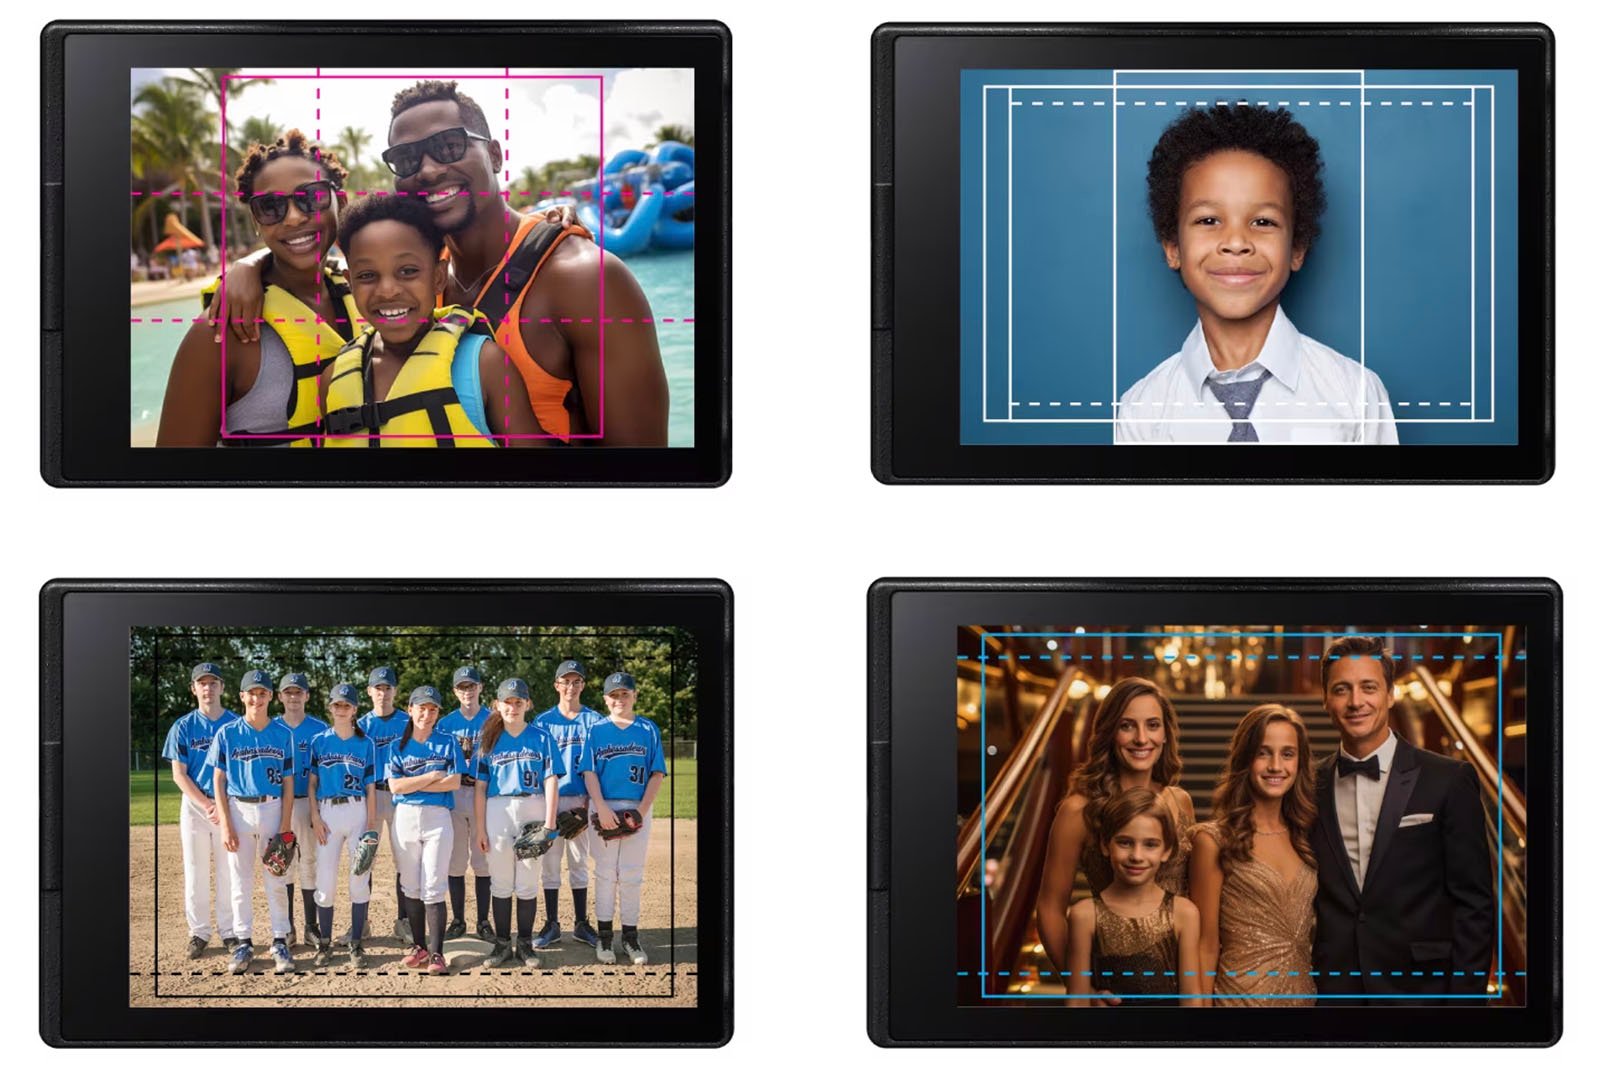 Four framed photos displayed on tablets: a happy black family at an amusement park, a black boy in a school uniform, a baseball team posed on a field, and a white family dressed elegantly at a formal event.